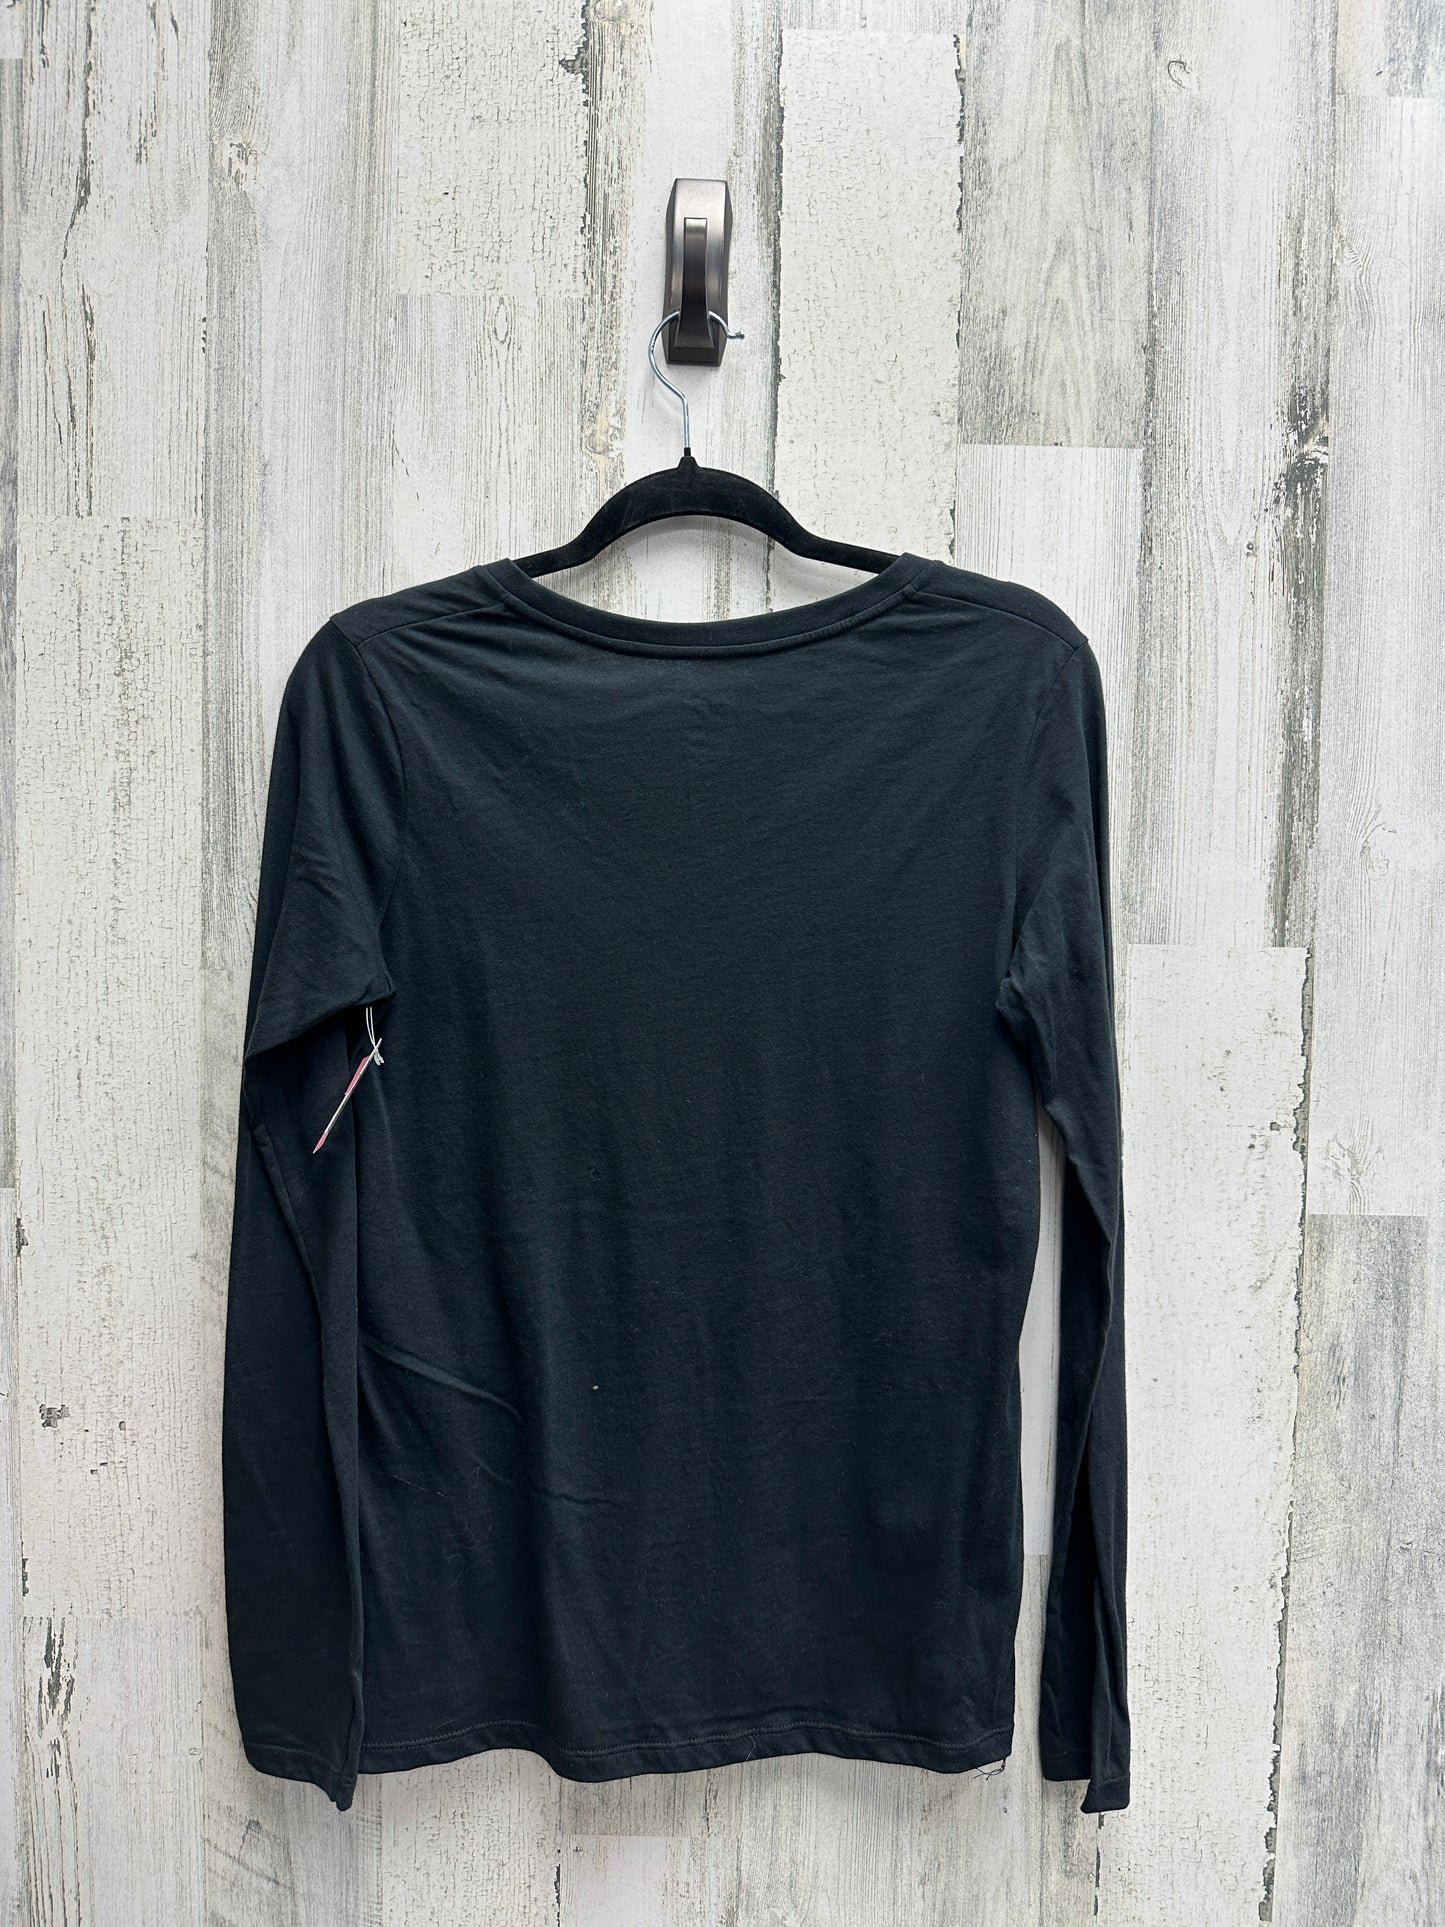 Top Long Sleeve Basic By Champion  Size: S